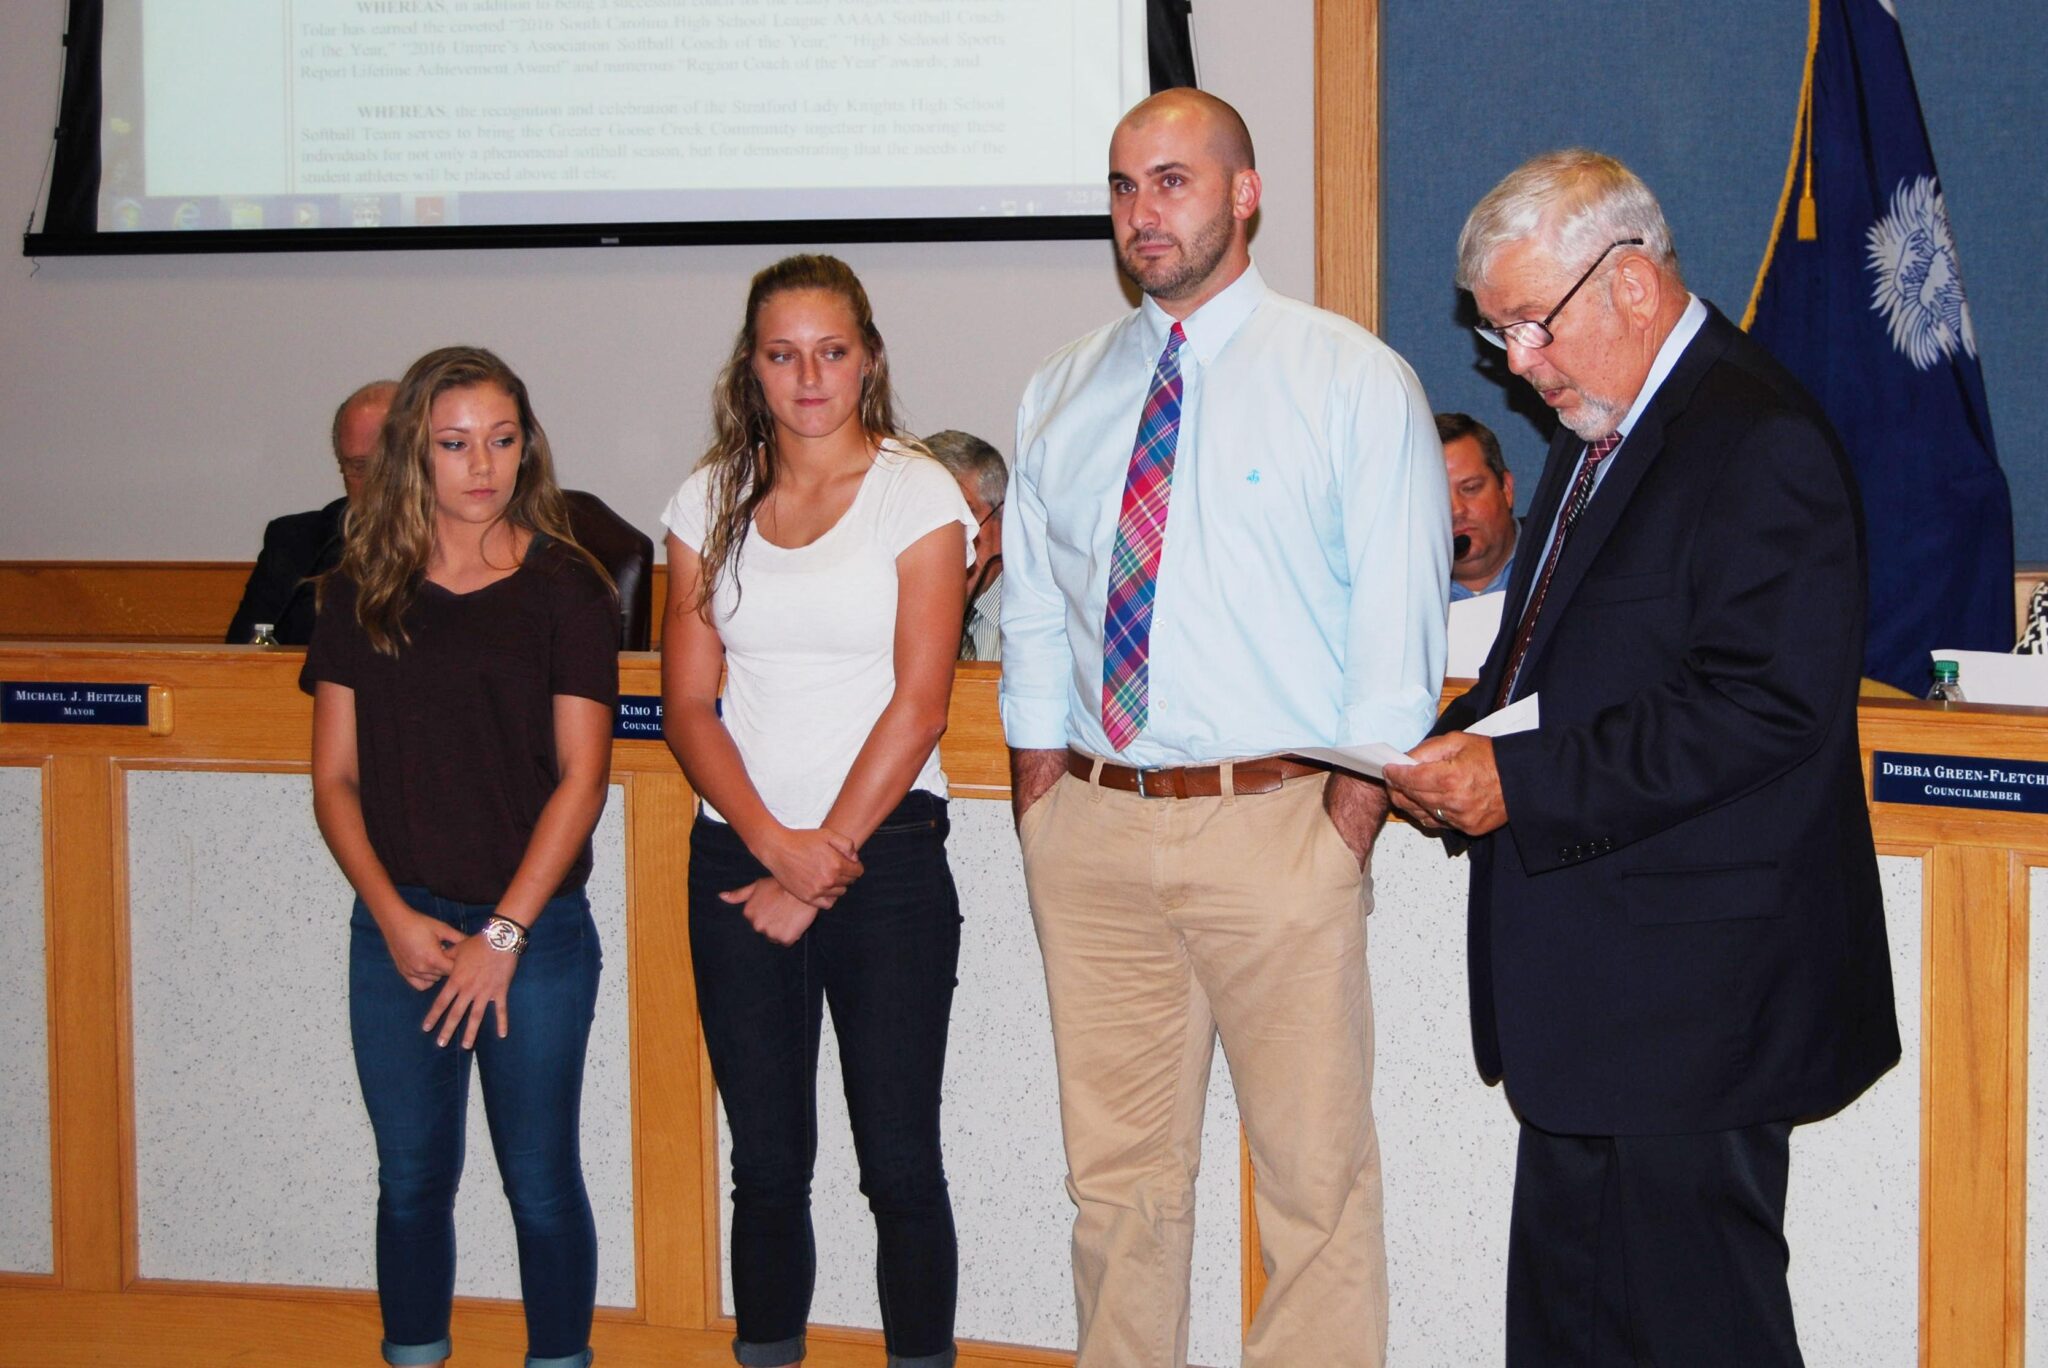 Pictured: Goose Creek Mayor Pro Tem Mark Phillips reads a resolution honoring the Stratford softball team during the Sept. 13 City Council meeting. Pictured from the team are Amber Orvin, Chloe Pelham and assistant coach Nic Riddle.